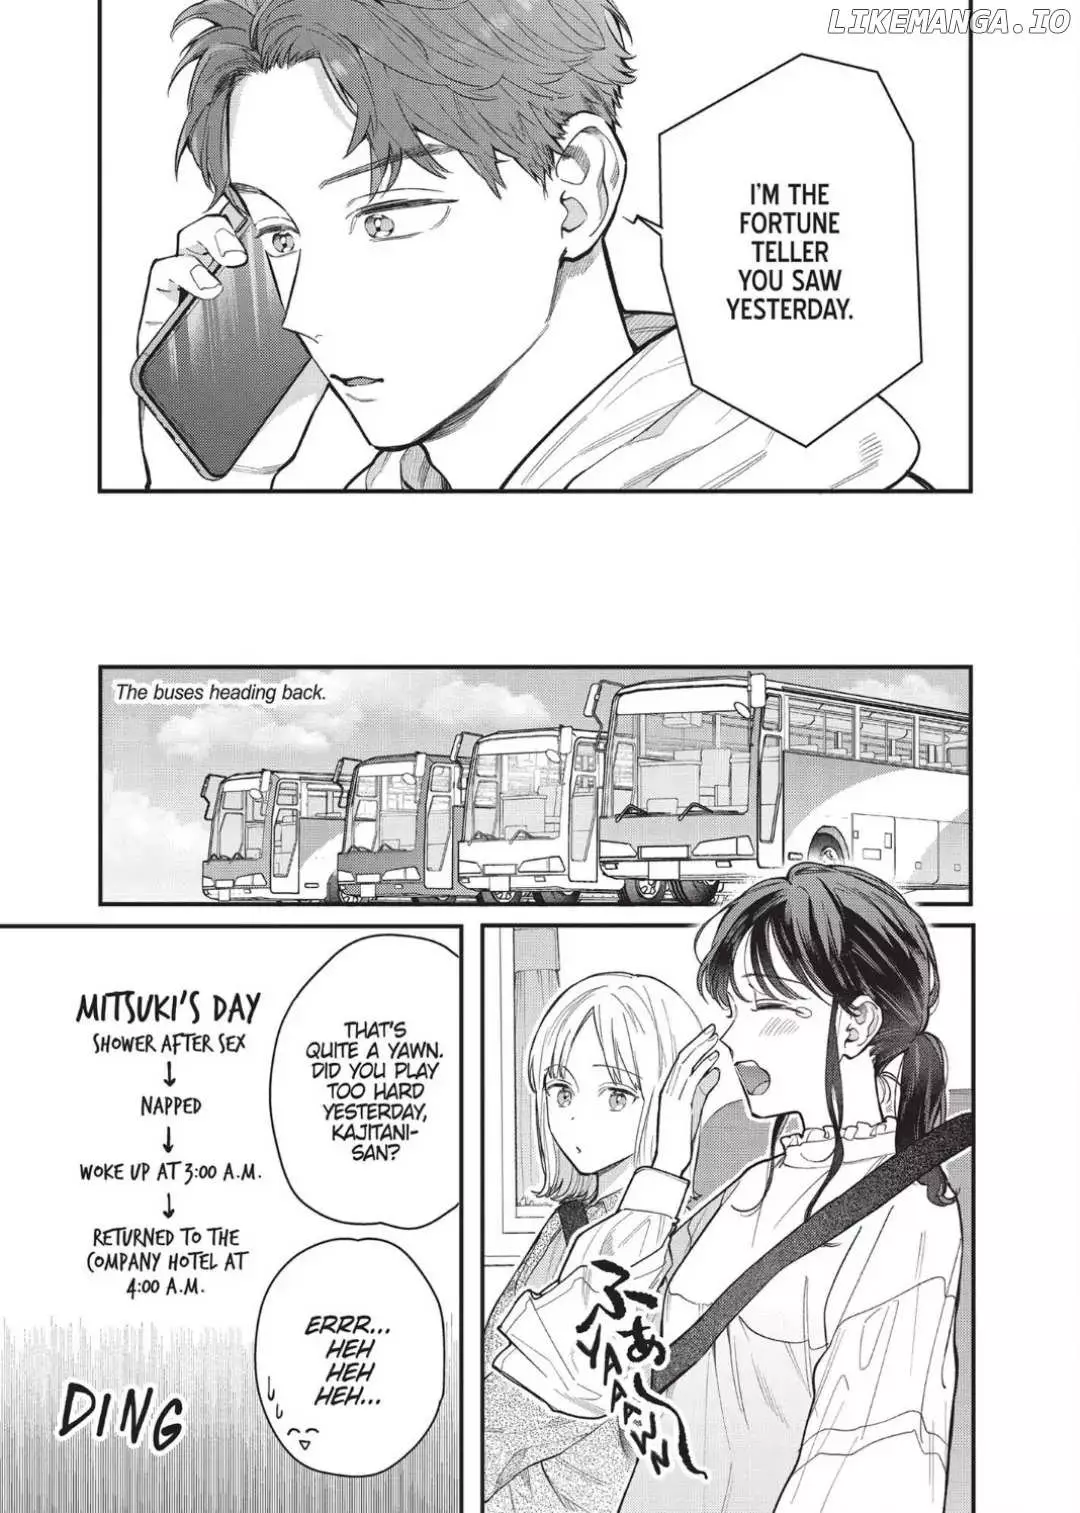 Is It Wrong To Get Done By A Girl? - 28 page 4-fe94671c